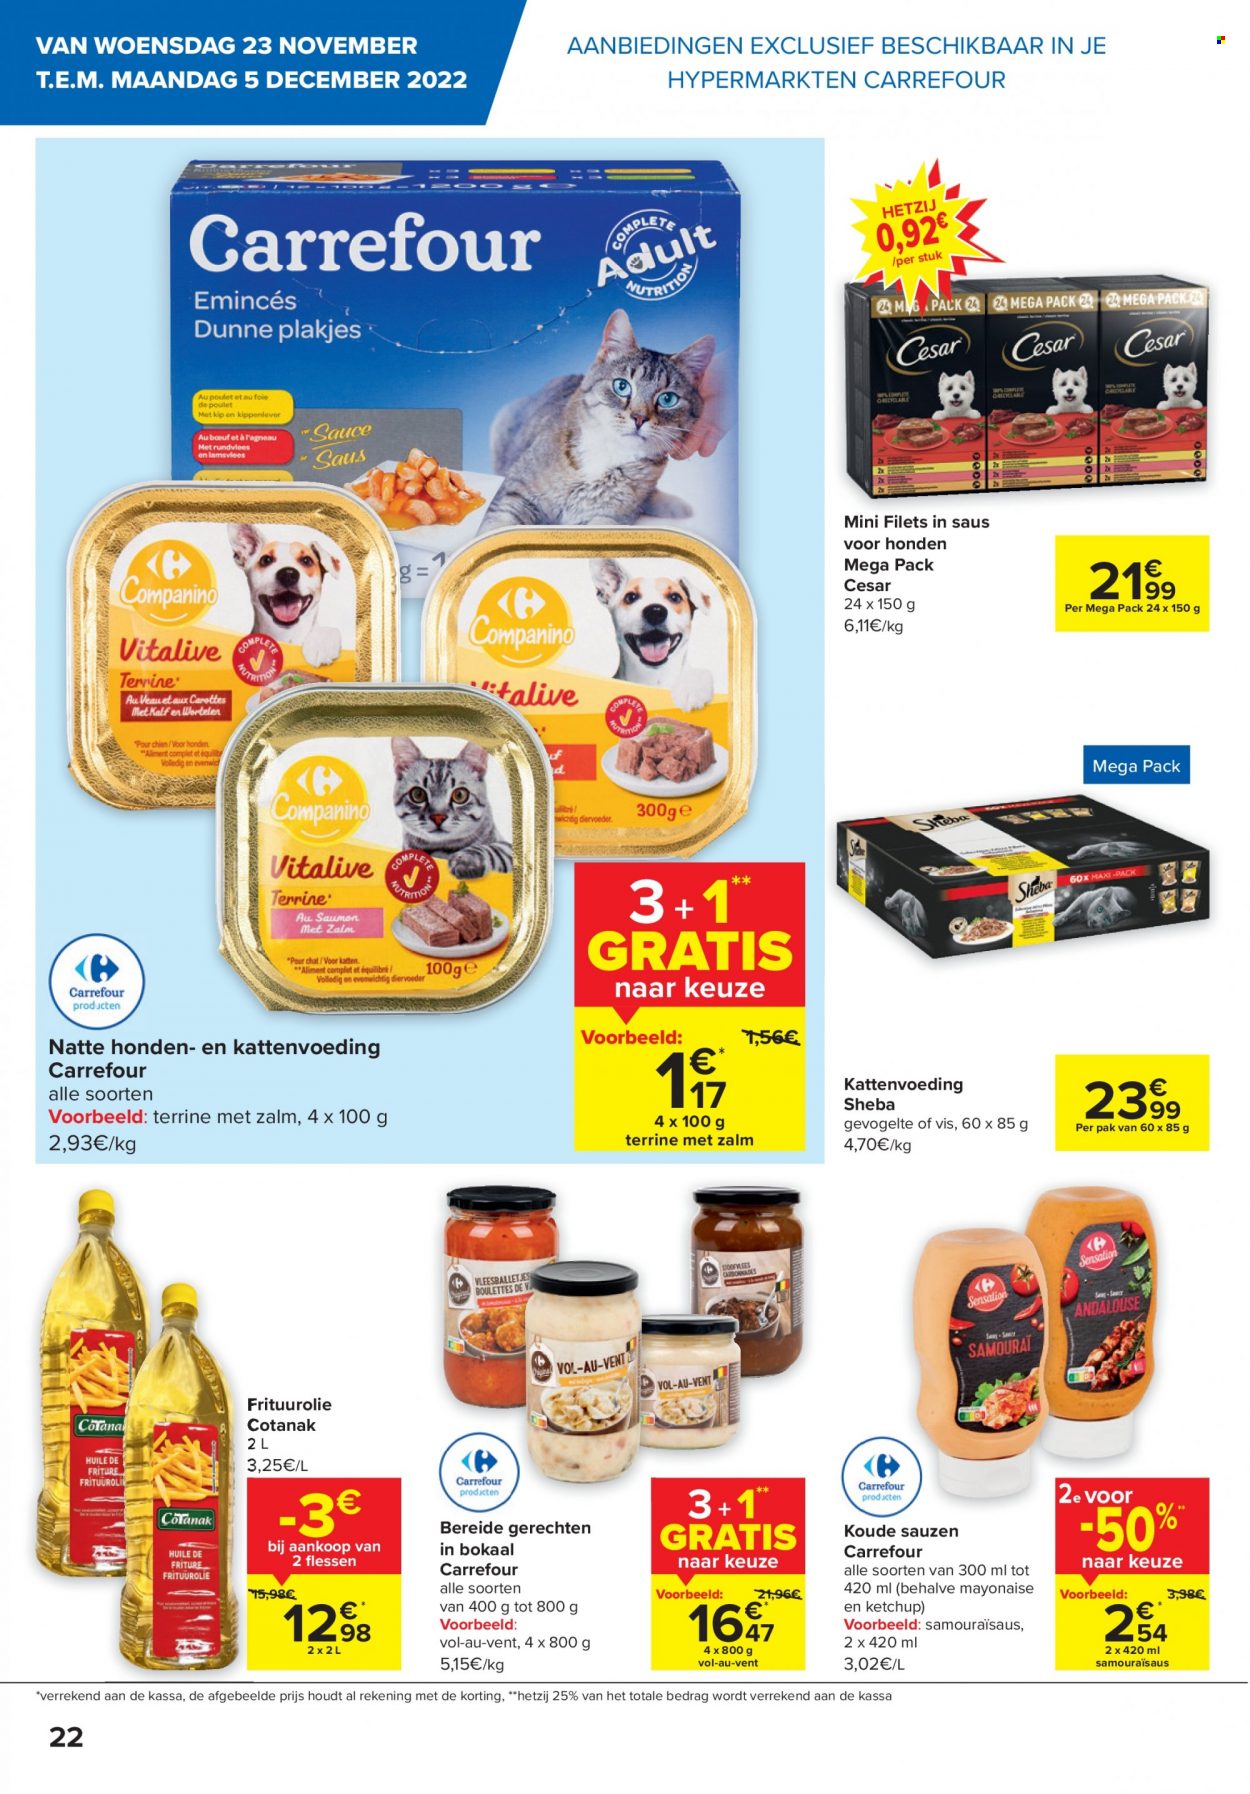 Catalogue Carrefour hypermarkt - 23.11.2022 - 5.12.2022. Page 22.